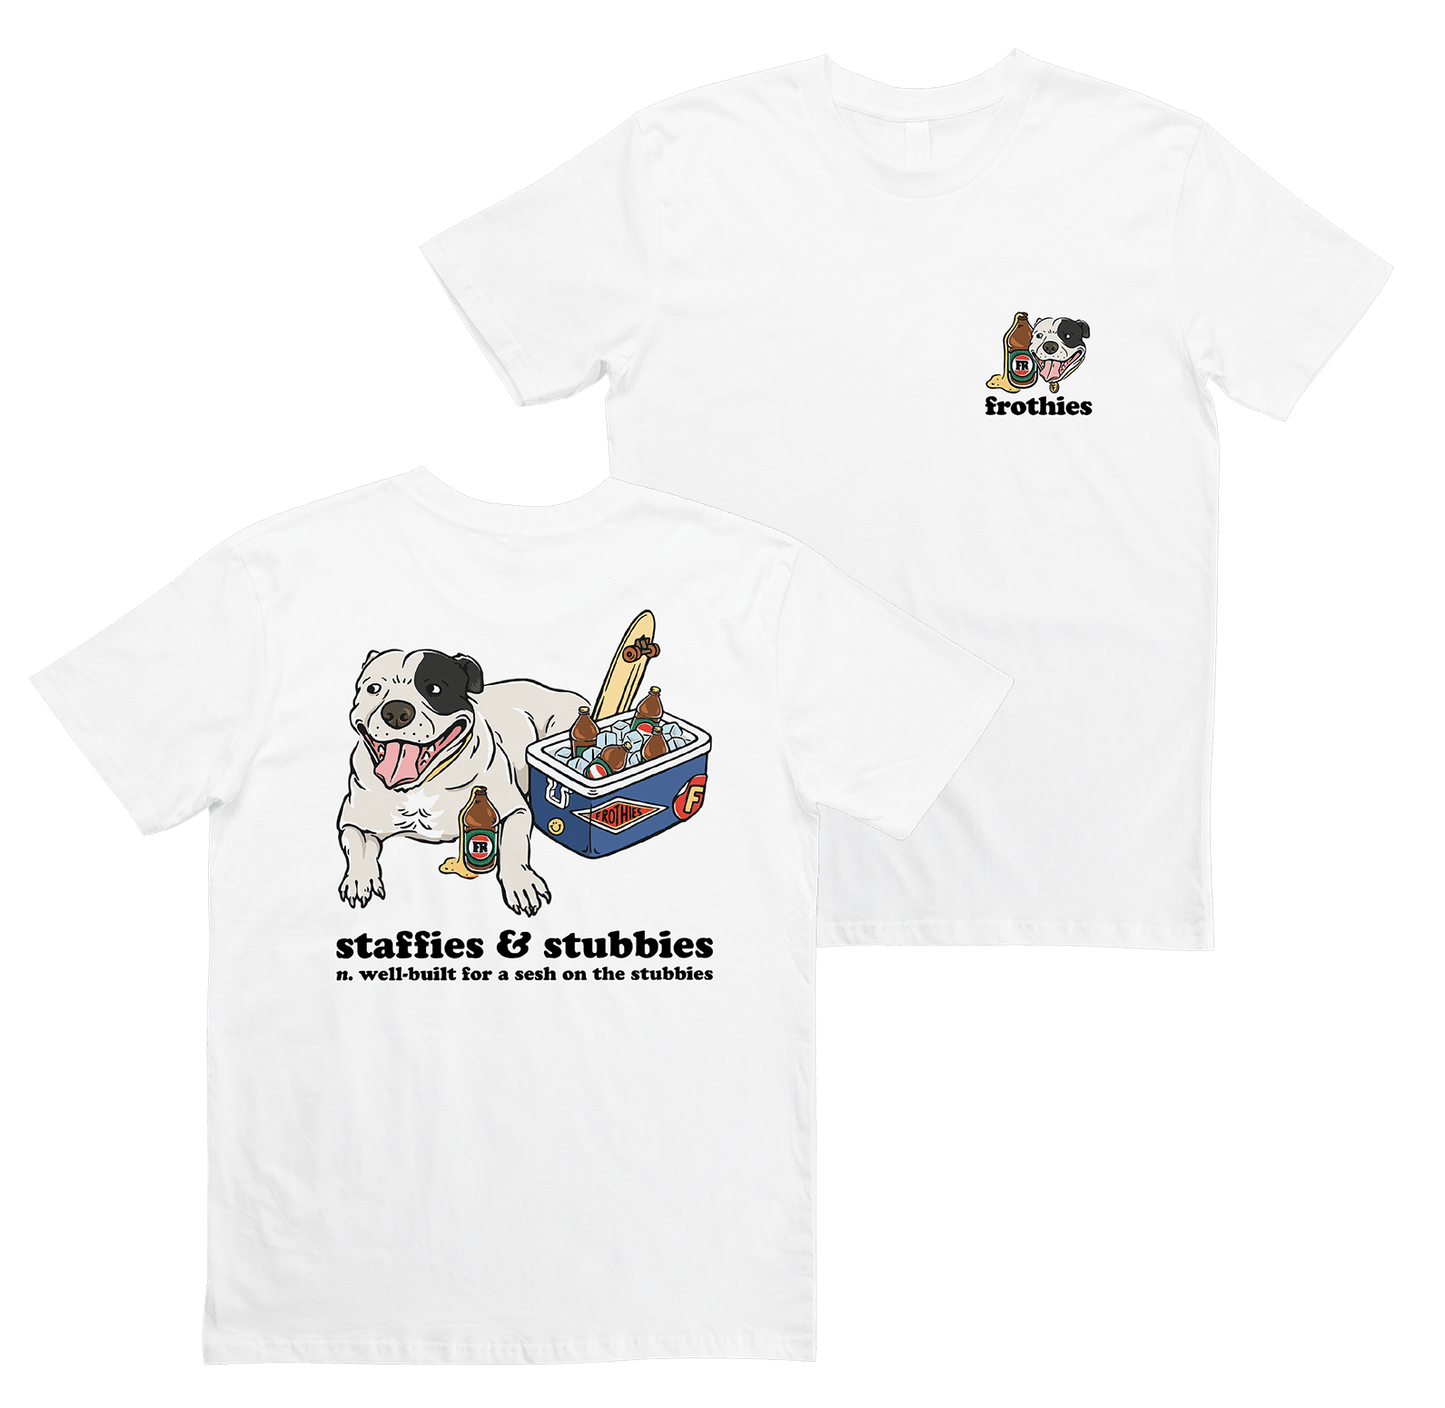 Staffies & Stubbies Tee T-Shirt Frothies